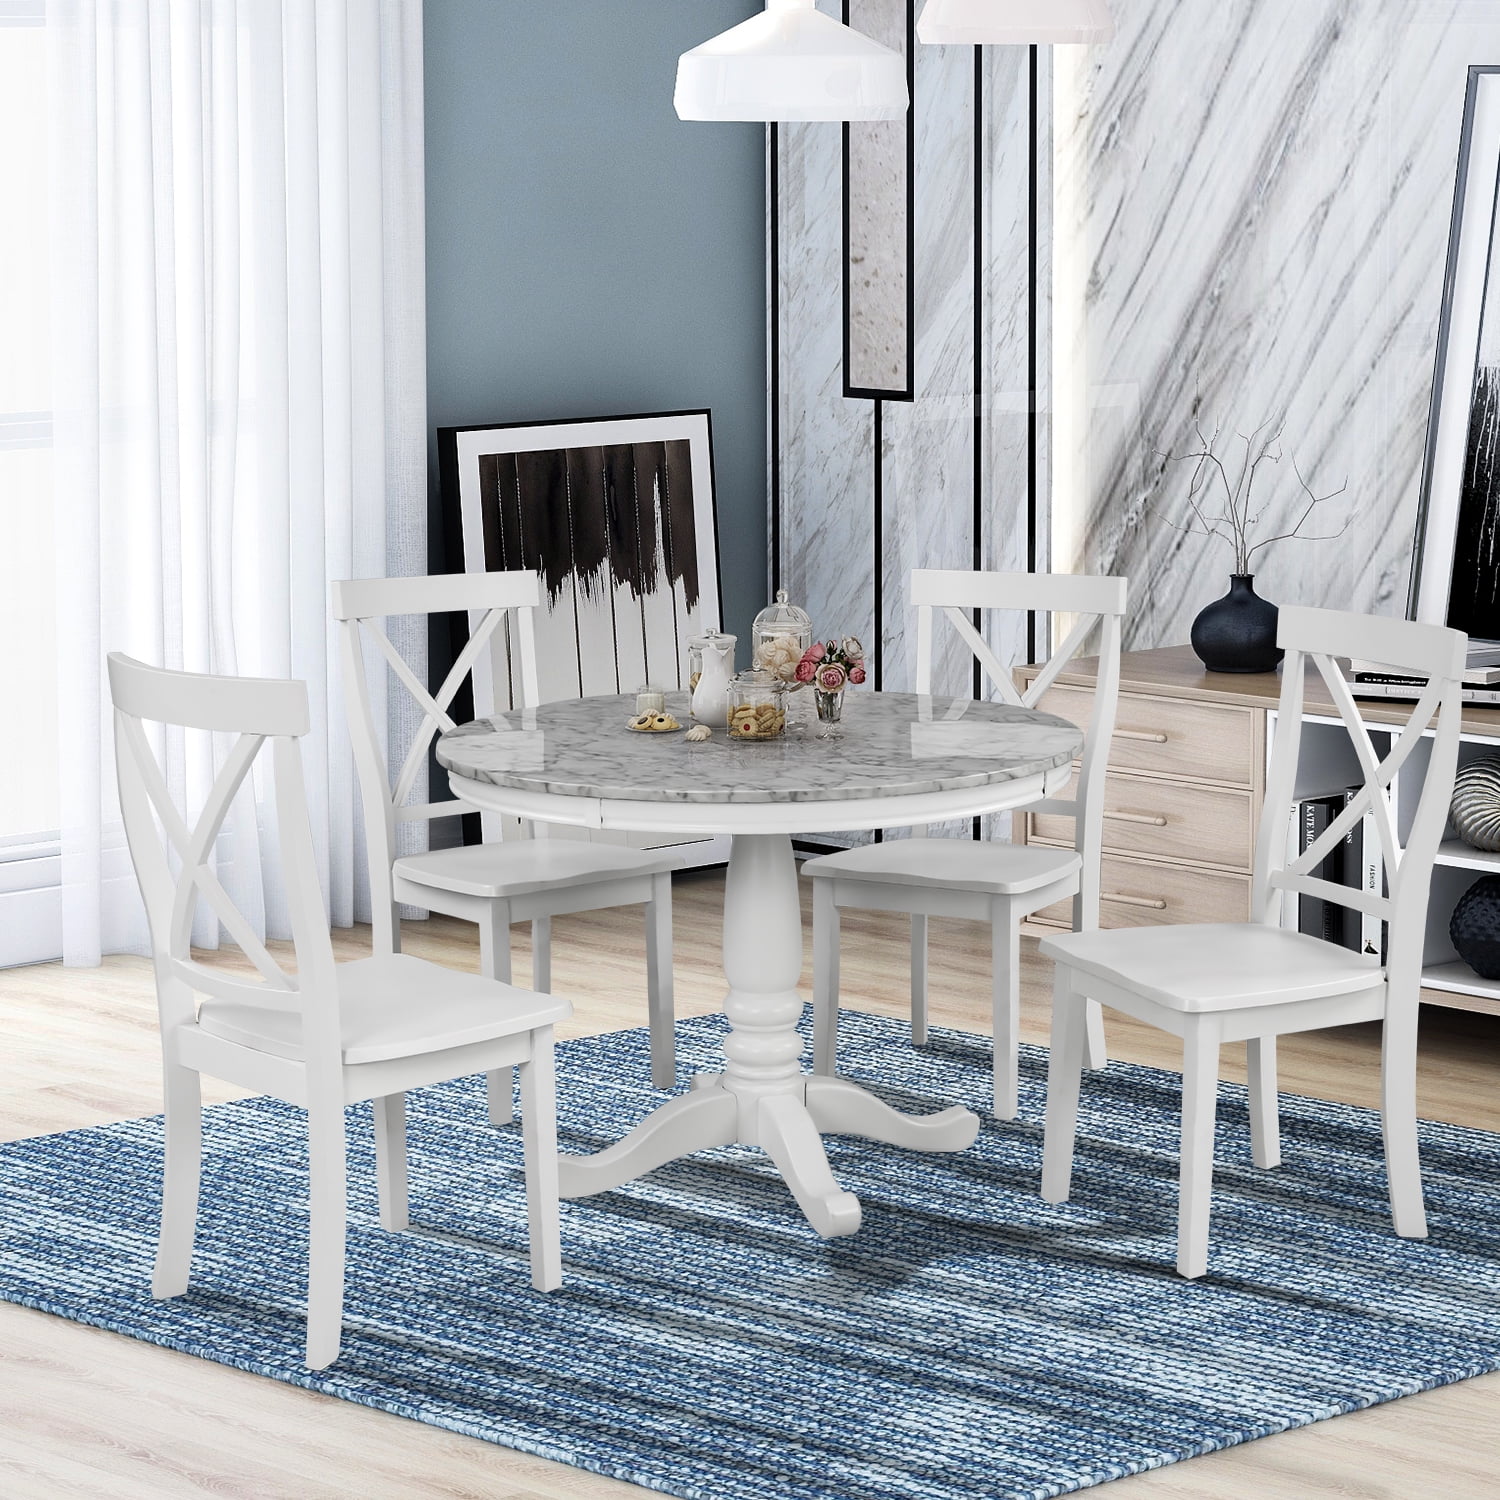 Contemporary Kitchen Table Chair Set, Modern Round Dining Room Tables And Chairs